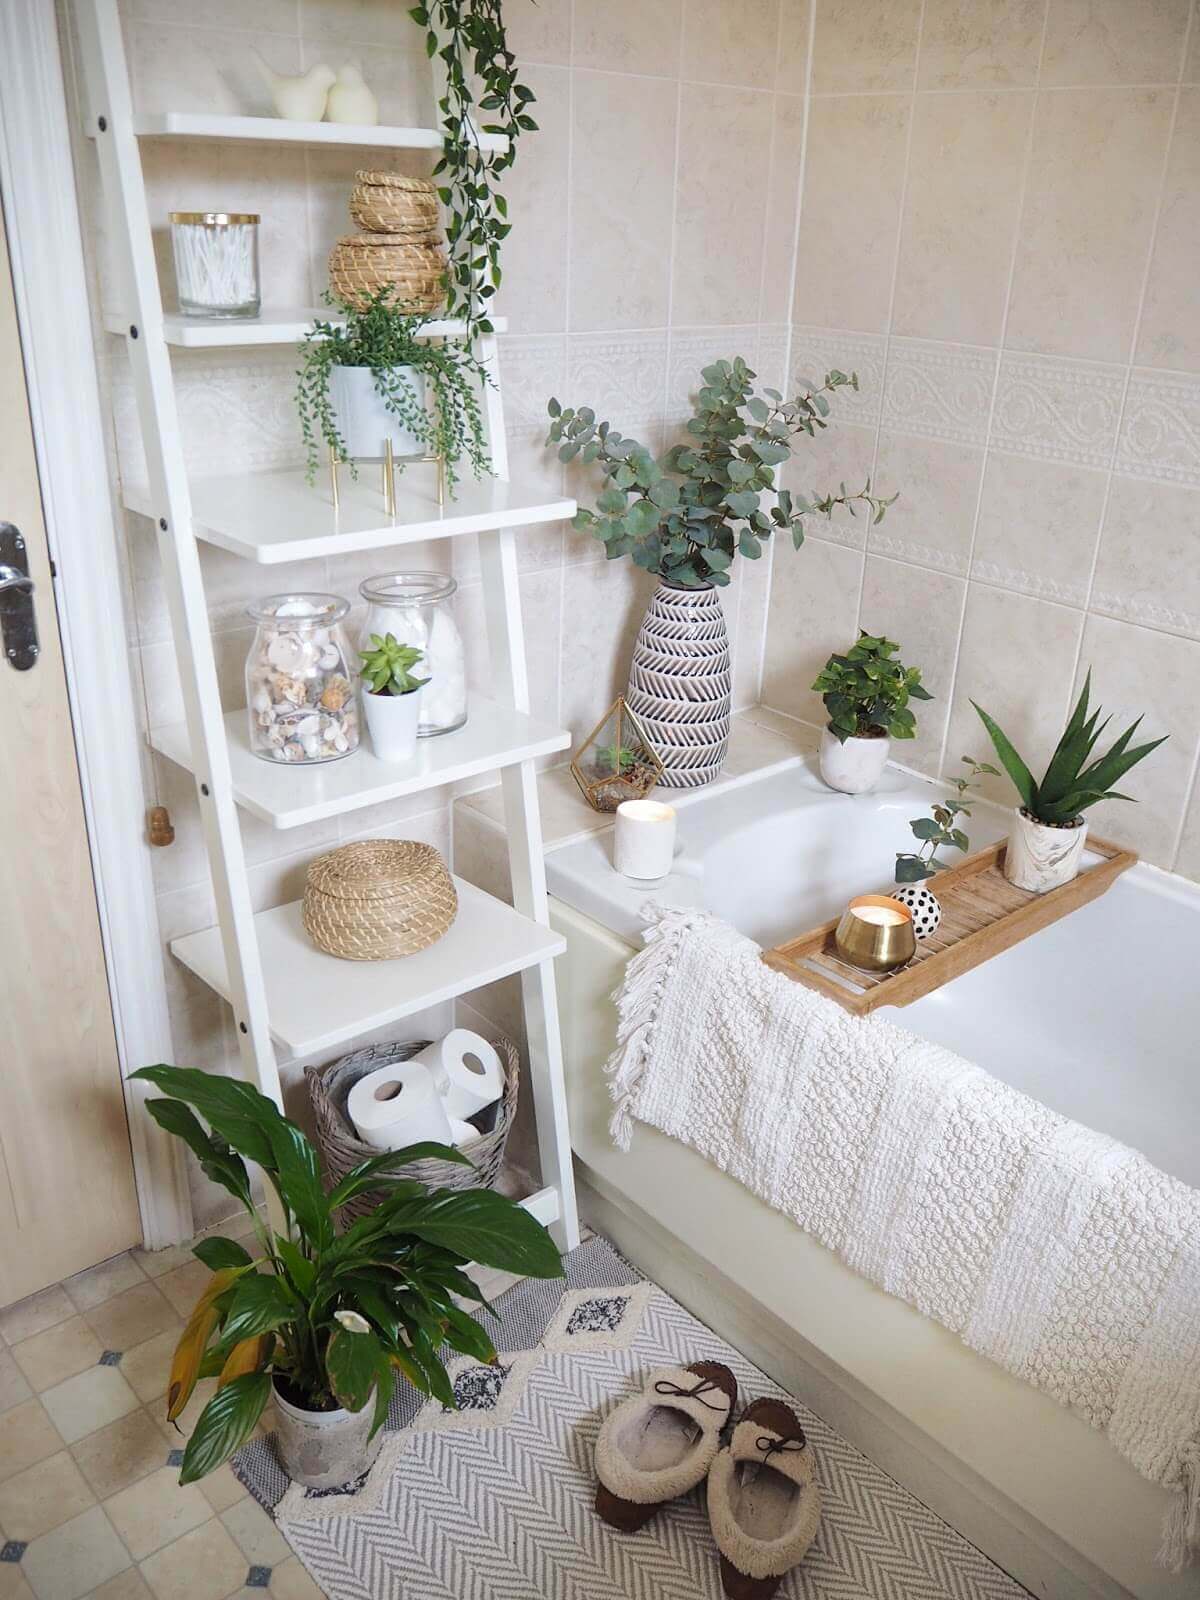 33 adorable ideas for plant shelves in the bathroom - 243